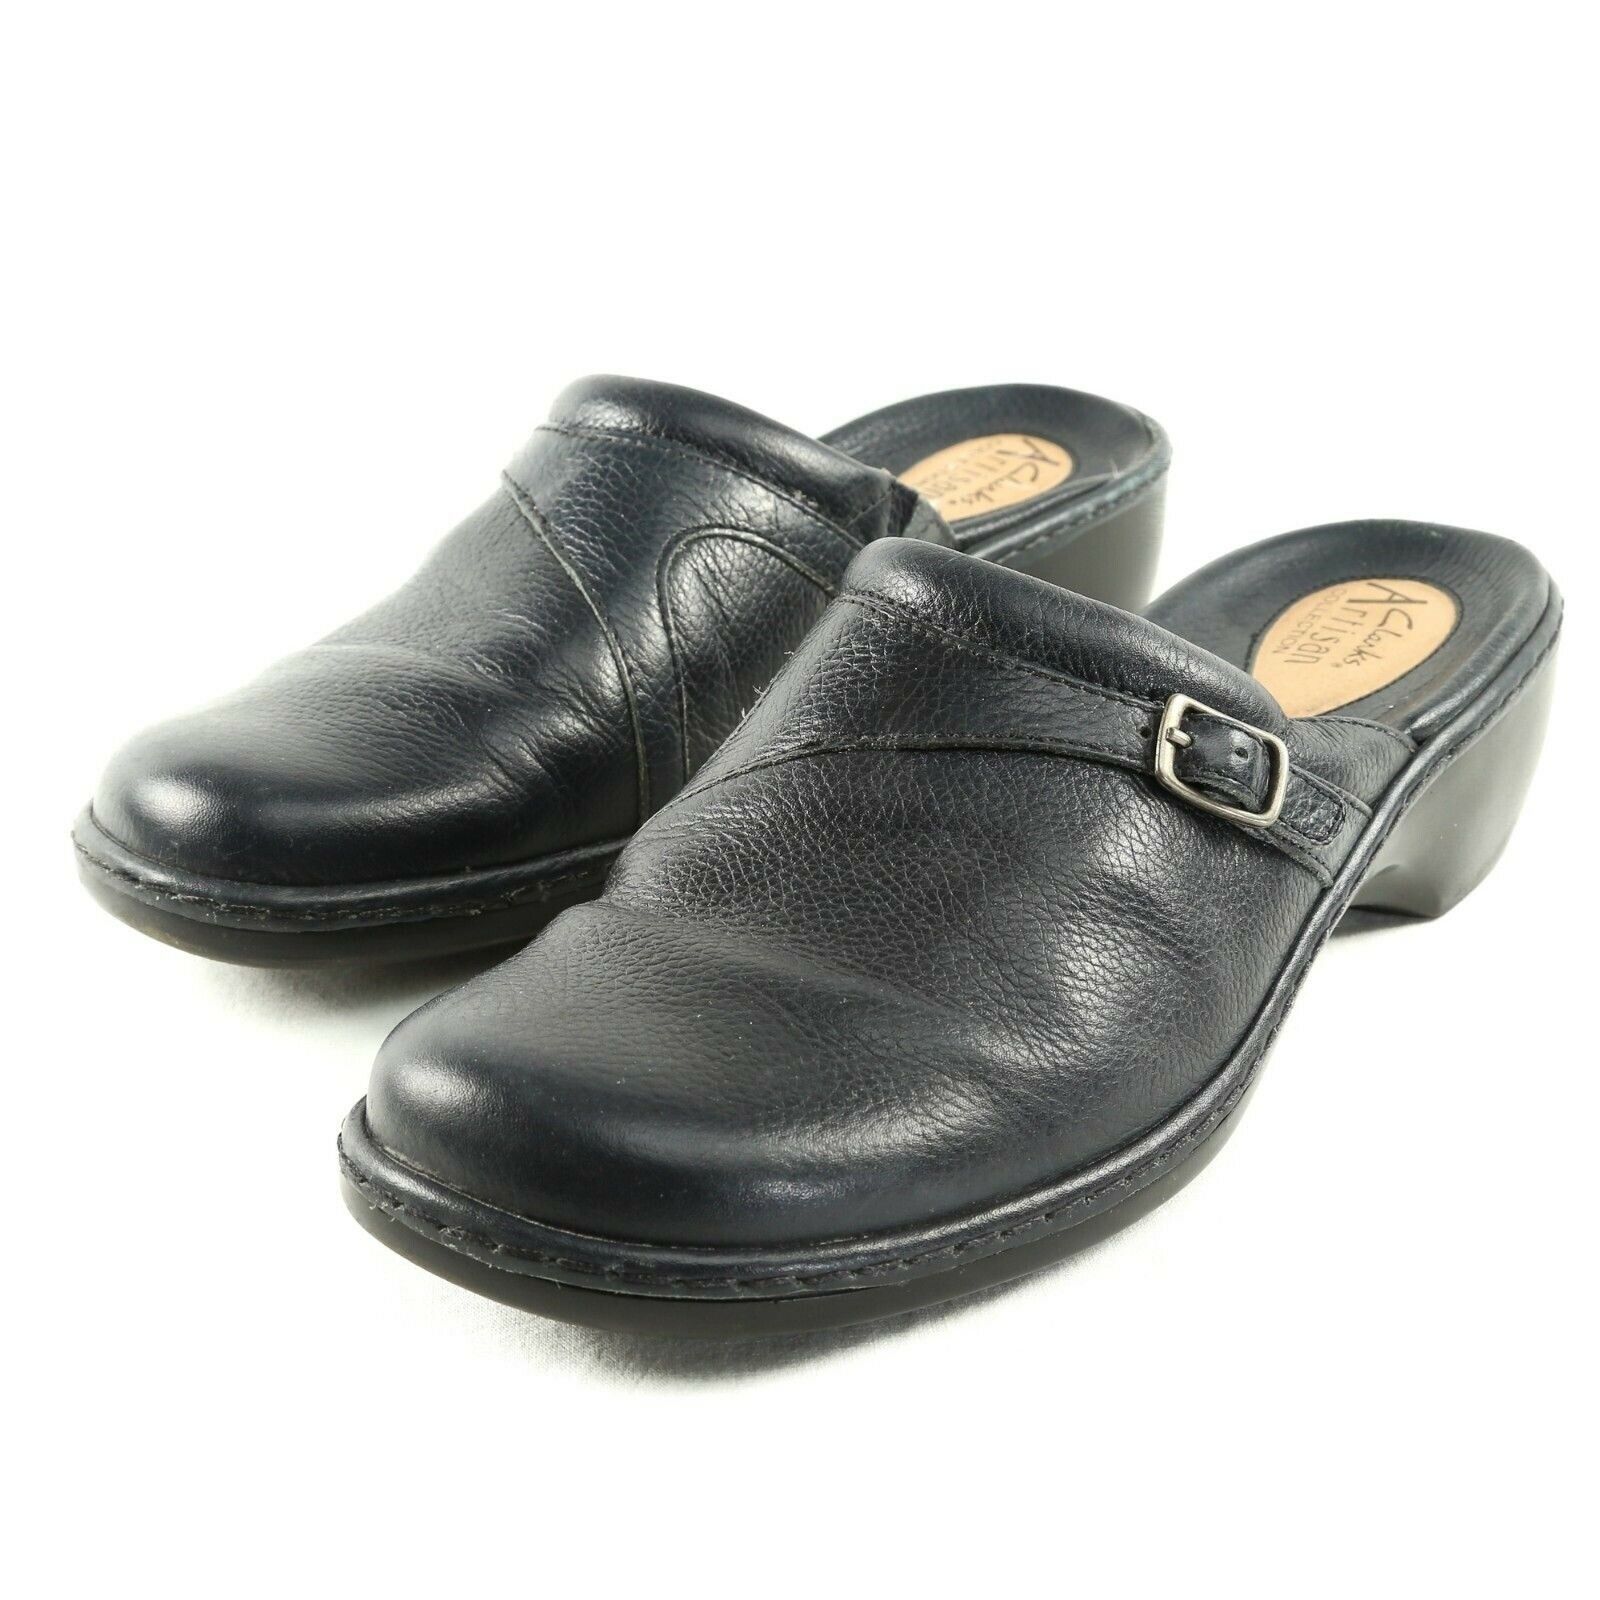 clarks shoes artisan collection